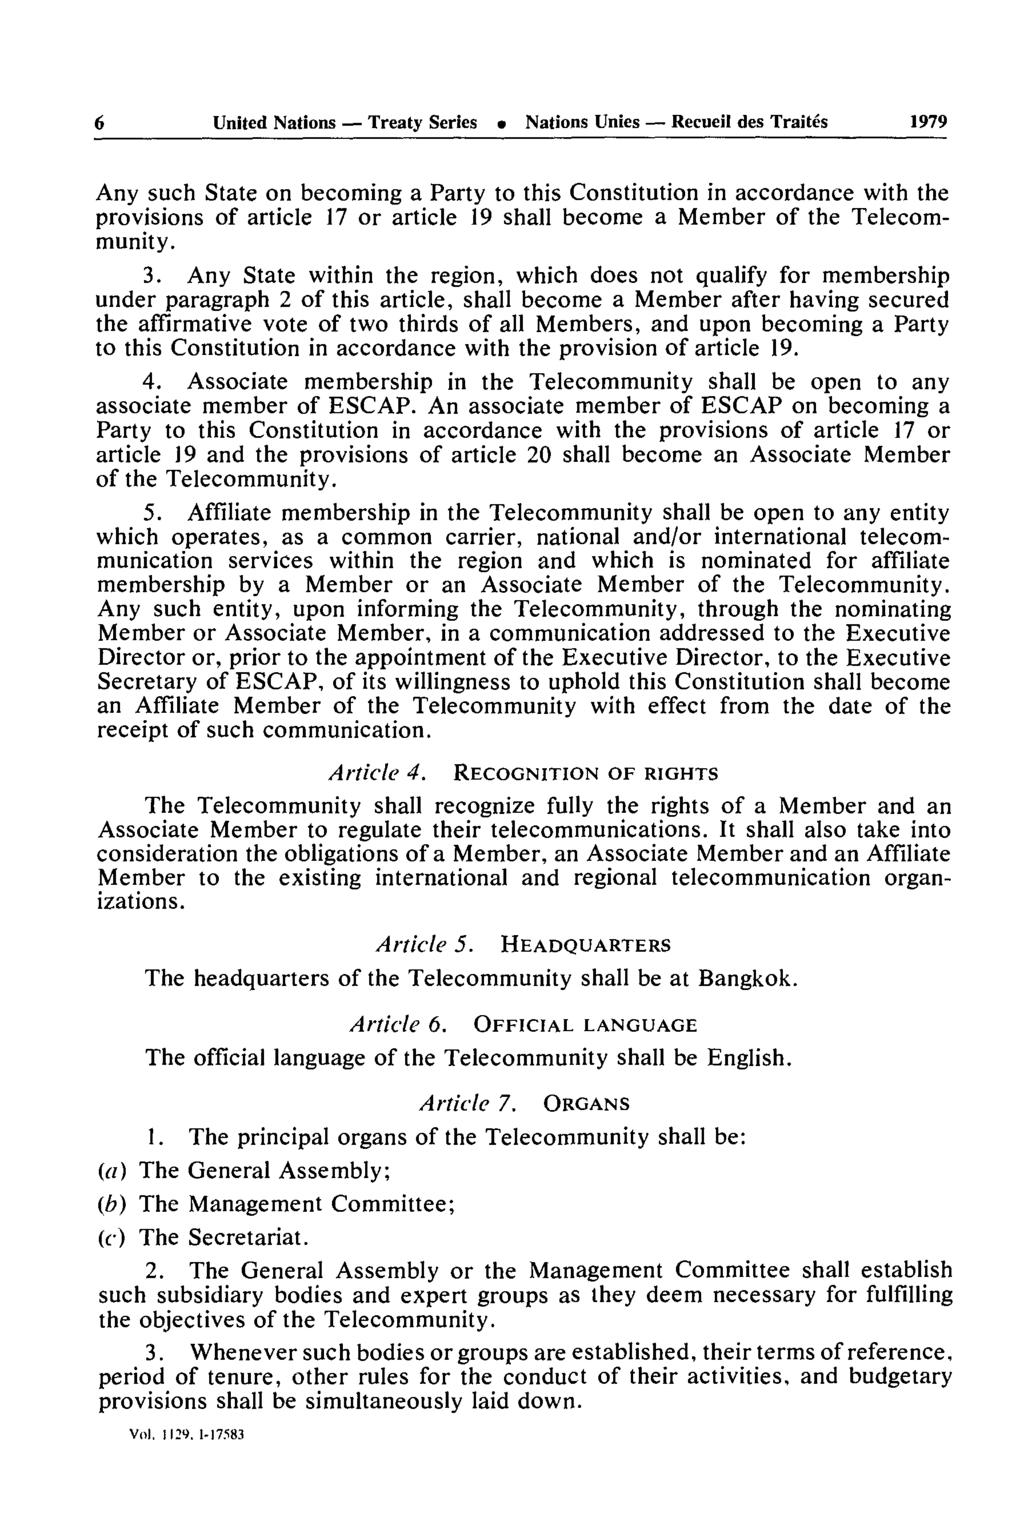 6 United Nations Treaty Series Nations Unies Recueil des Traités 1979 Any such State on becoming a Party to this Constitution in accordance with the provisions of article 17 or article 19 shall